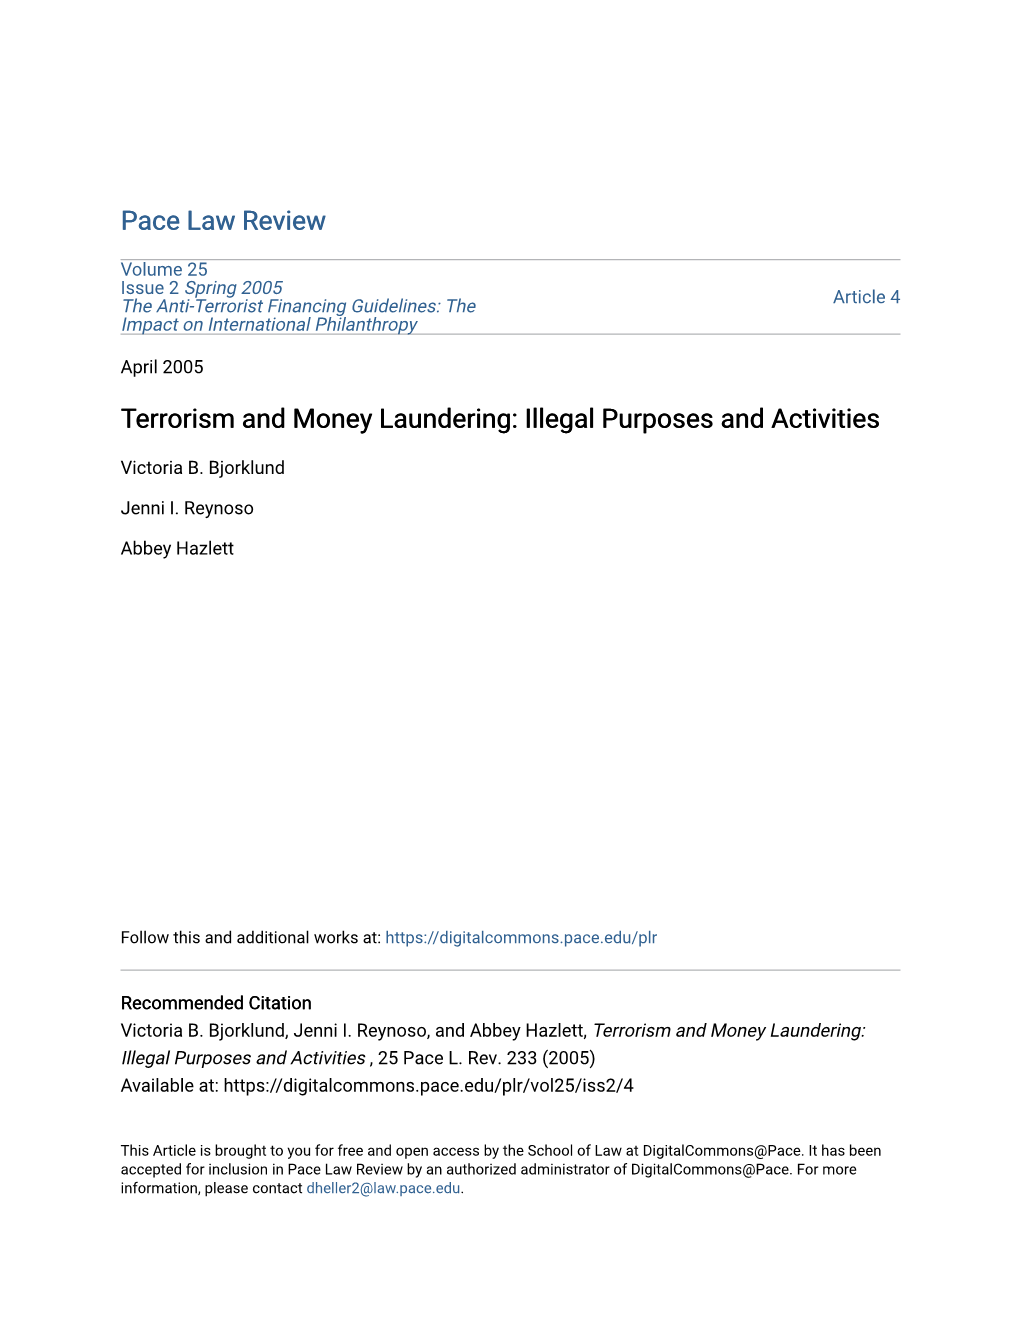 Terrorism and Money Laundering: Illegal Purposes and Activities